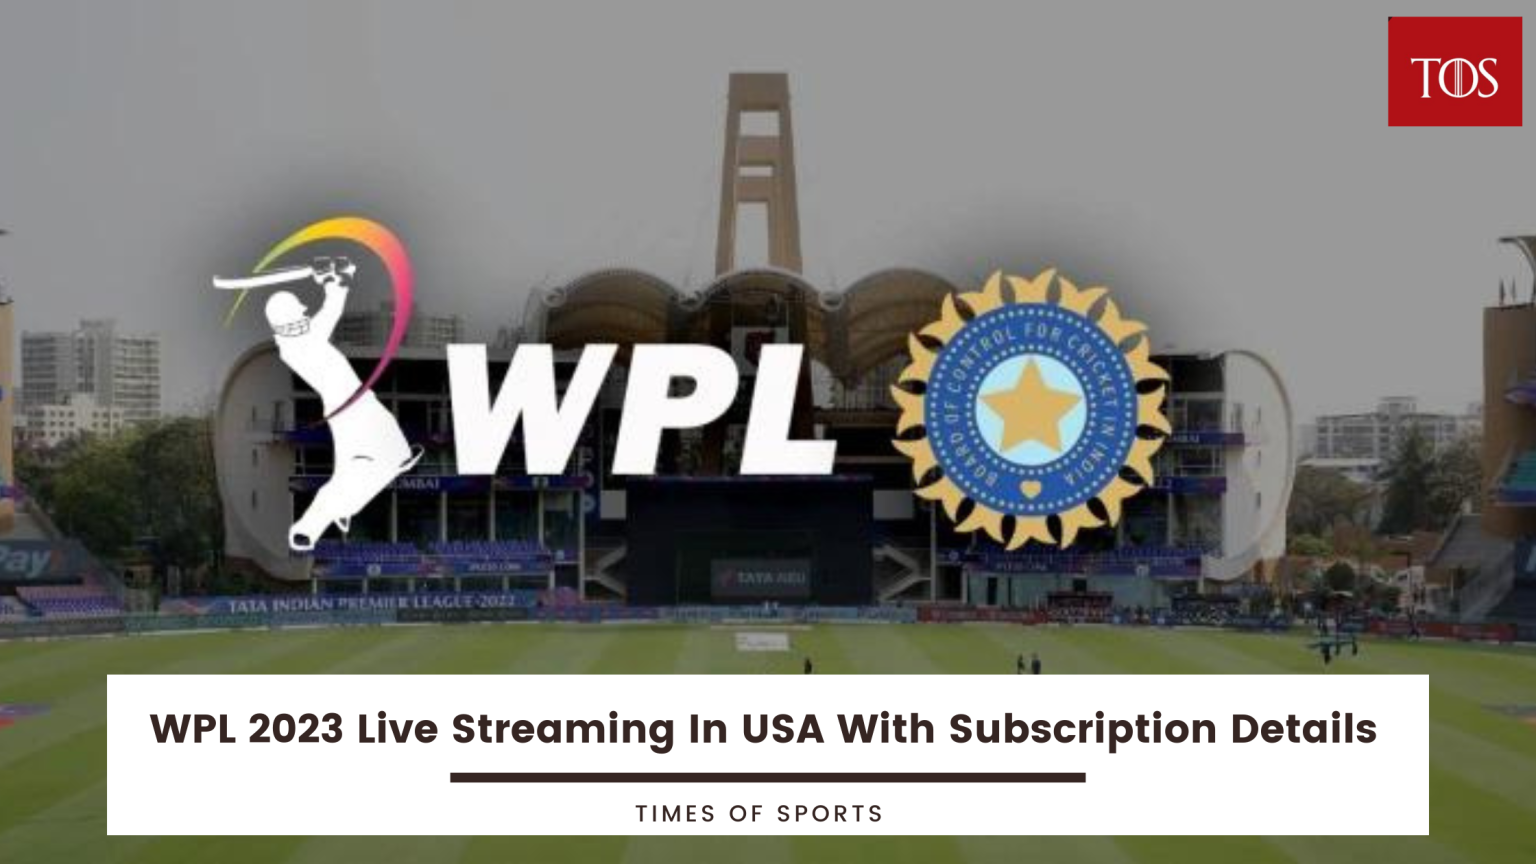 WPL 2023 Live Streaming In USA With Subscription Details